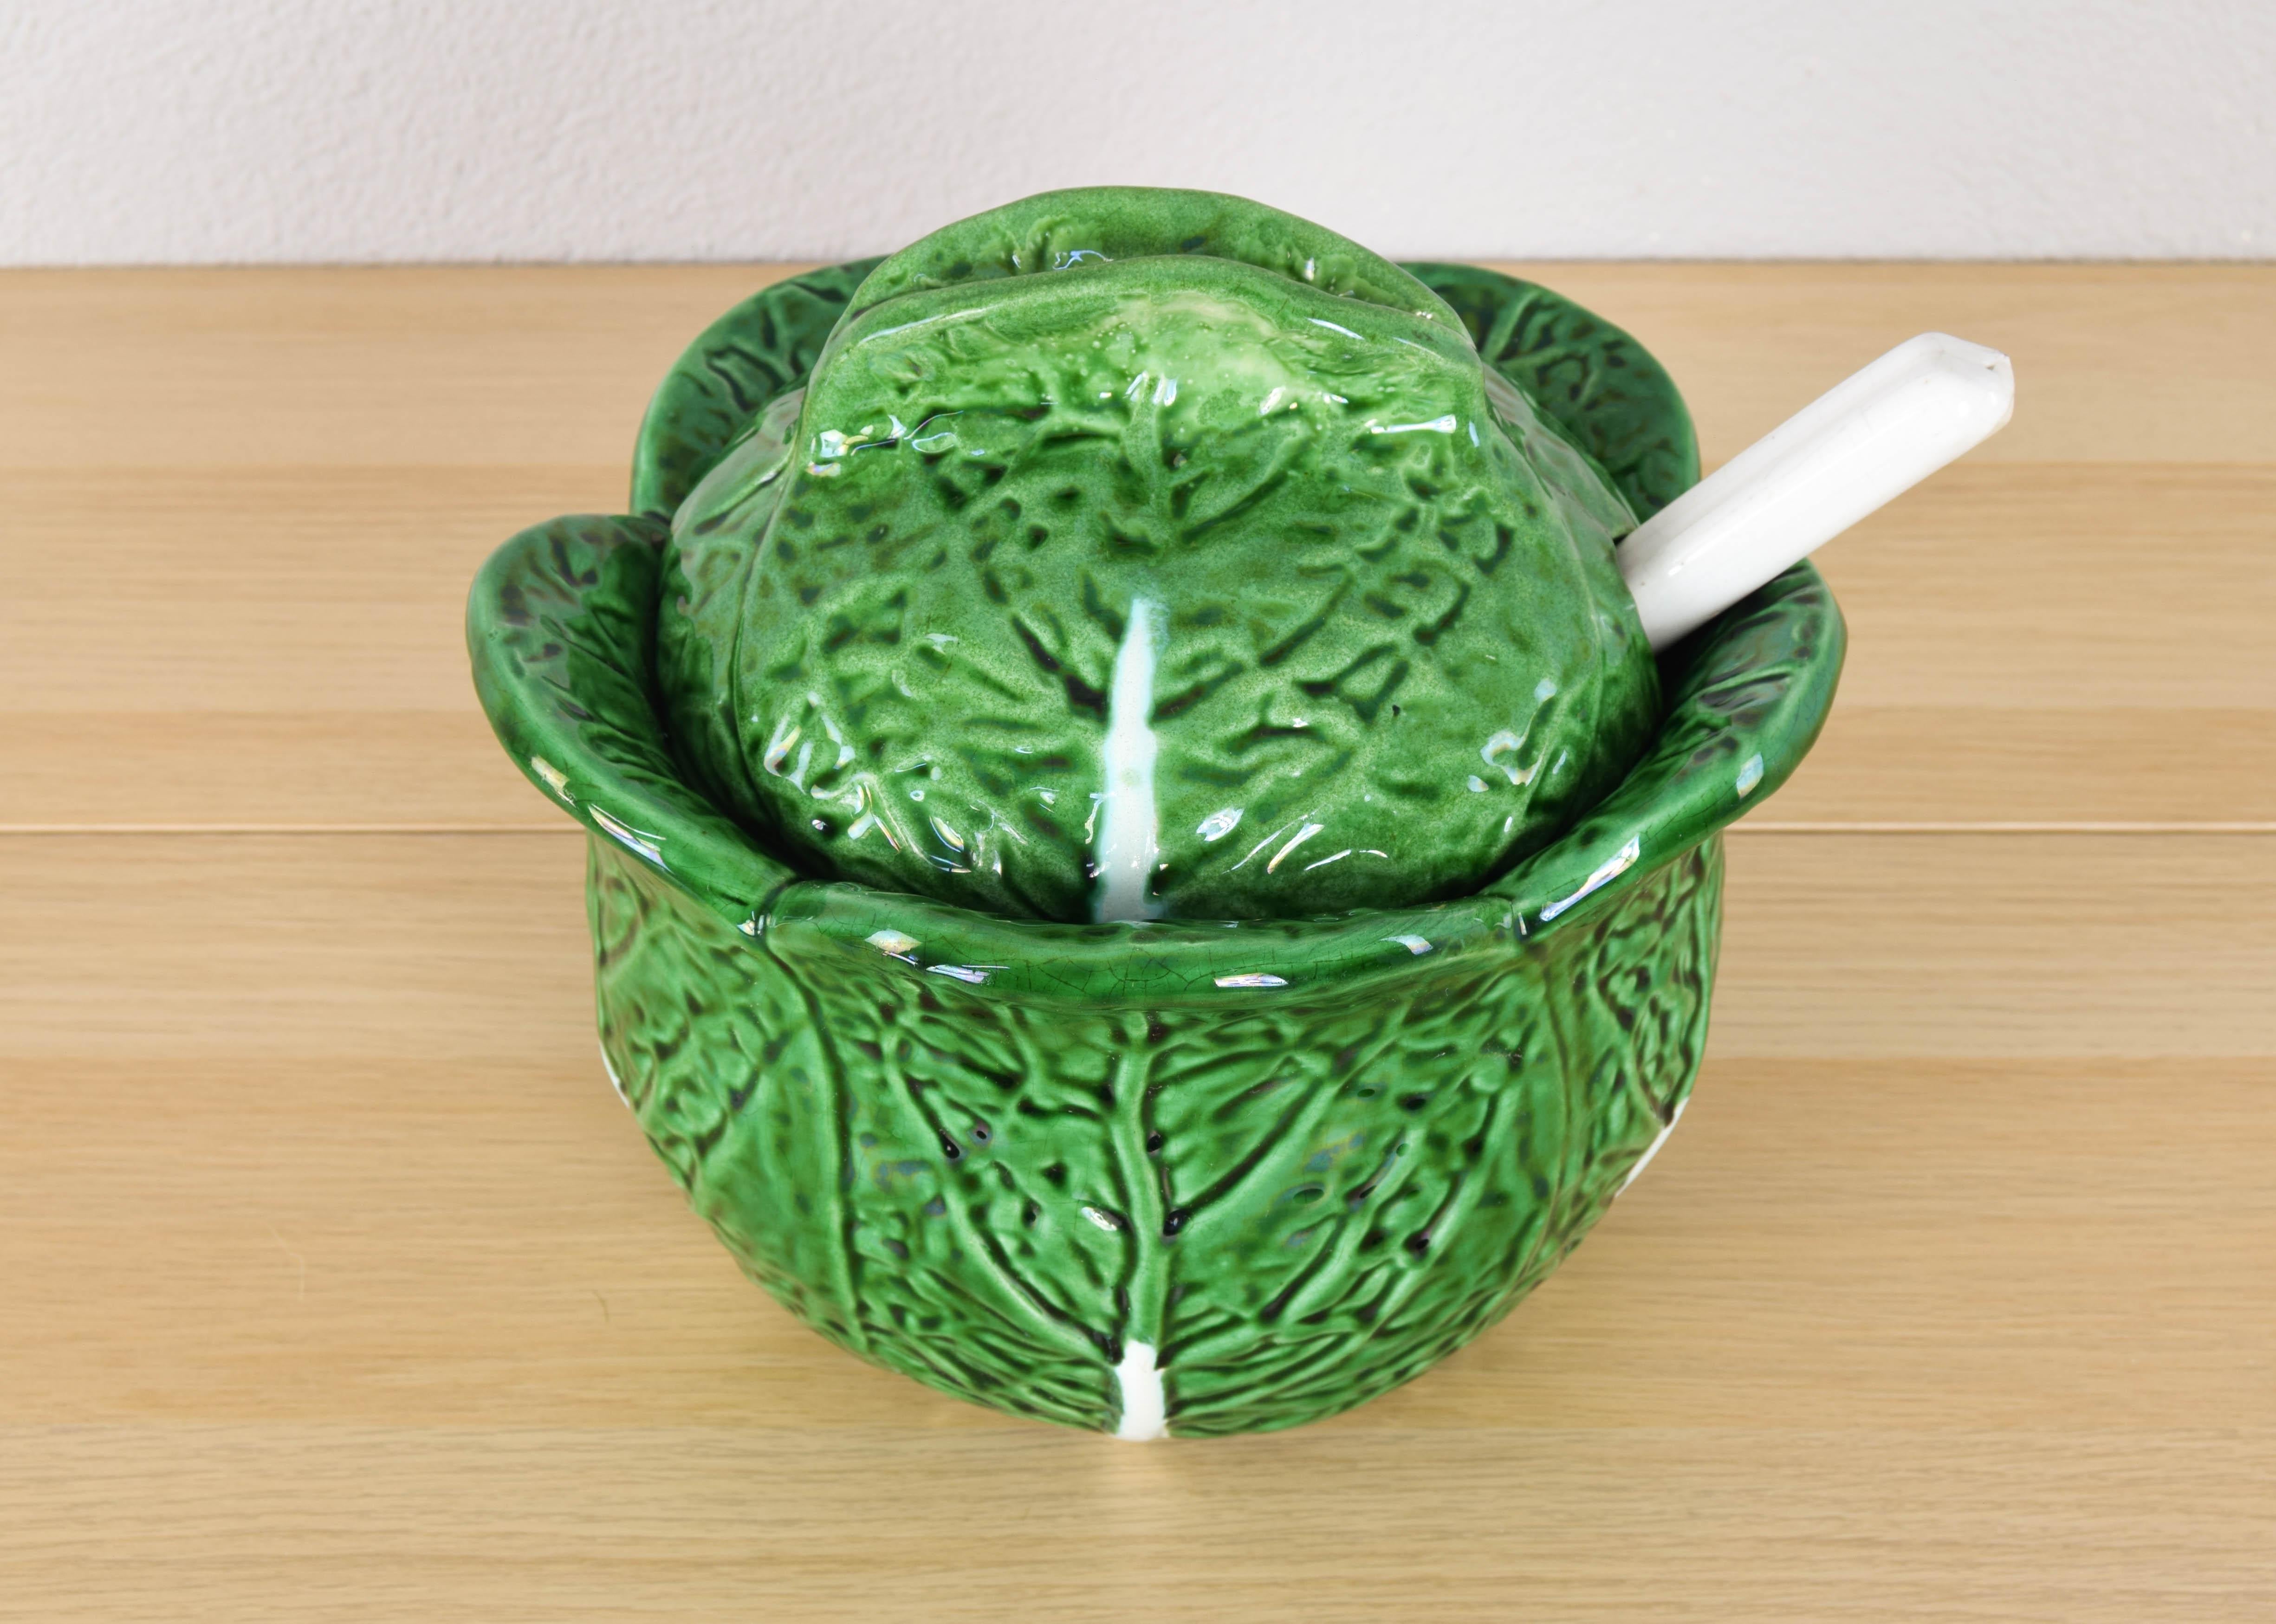 Beautiful and unique enameled ceramic tureen handmade in the shape of a cabbage leaf from Bordallo Pinheiro.
The salad bowl is in excellent condition, with no flaws. Its ladle has a missing tip that is detailed in the image.

These pieces, famous